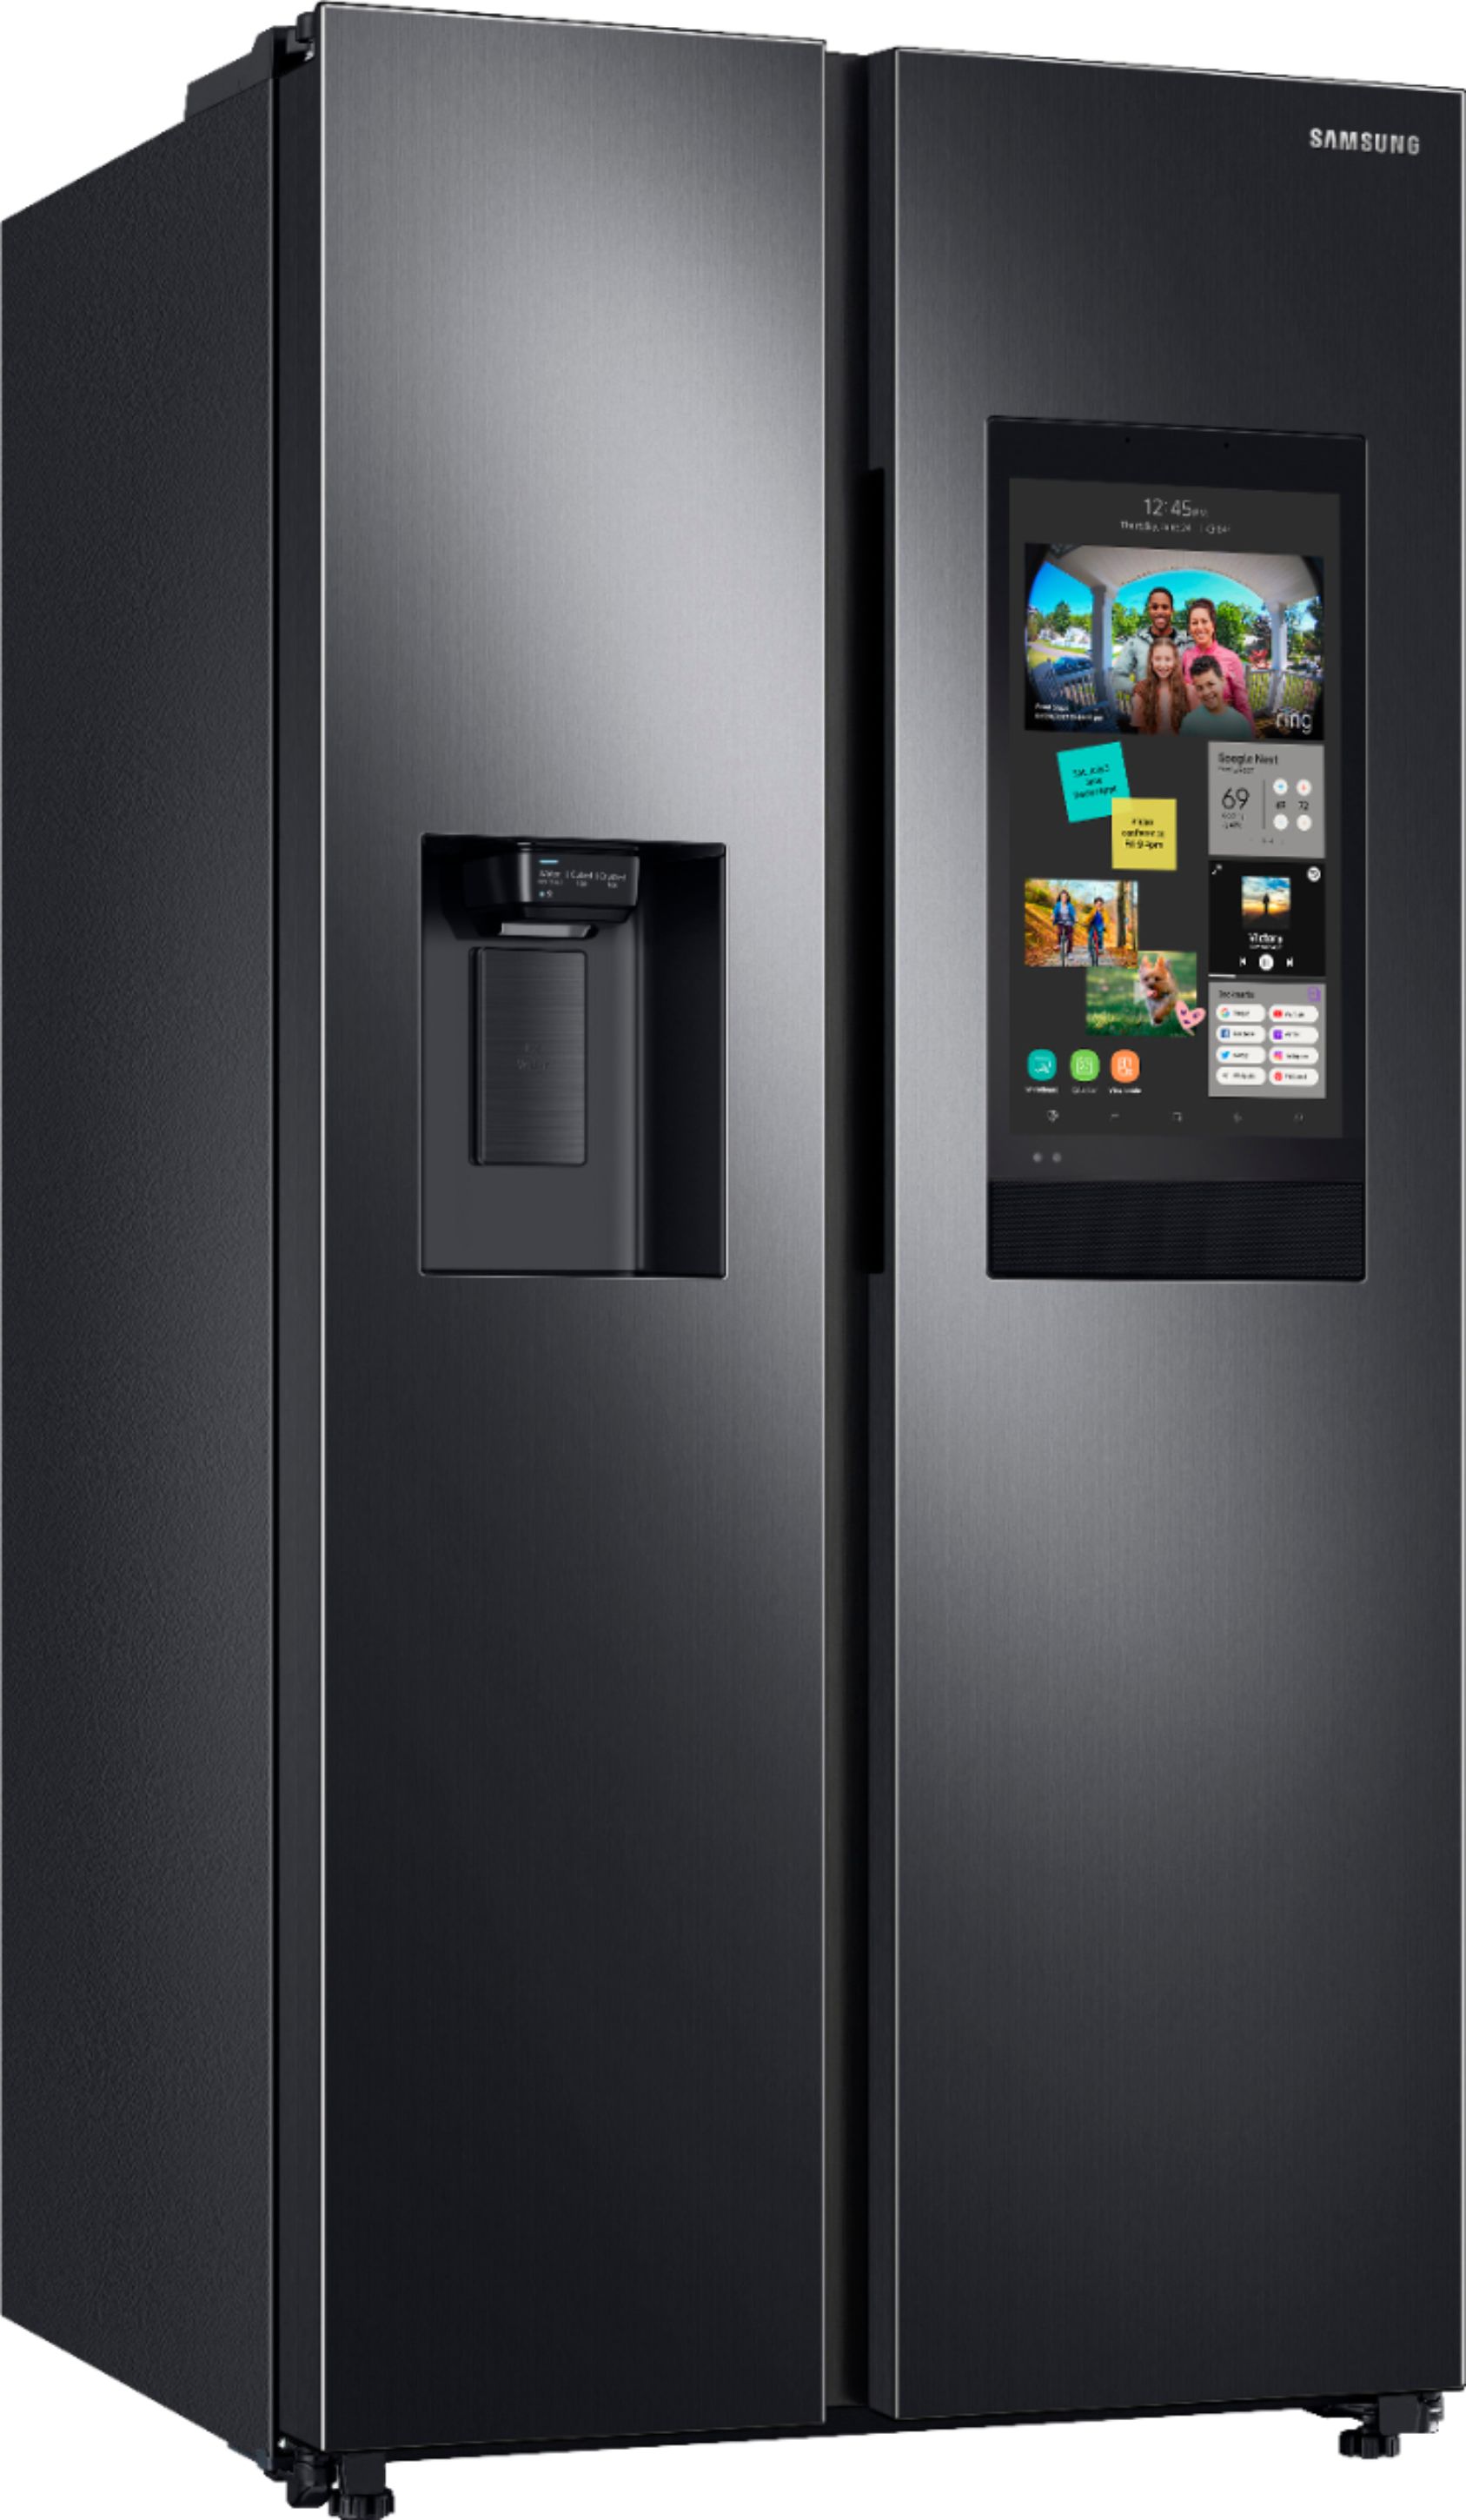 Angle View: Samsung - 26.7 Cu. Ft. Side-by-Side Refrigerator with 21.5" Touch-Screen Family Hub - Black stainless steel